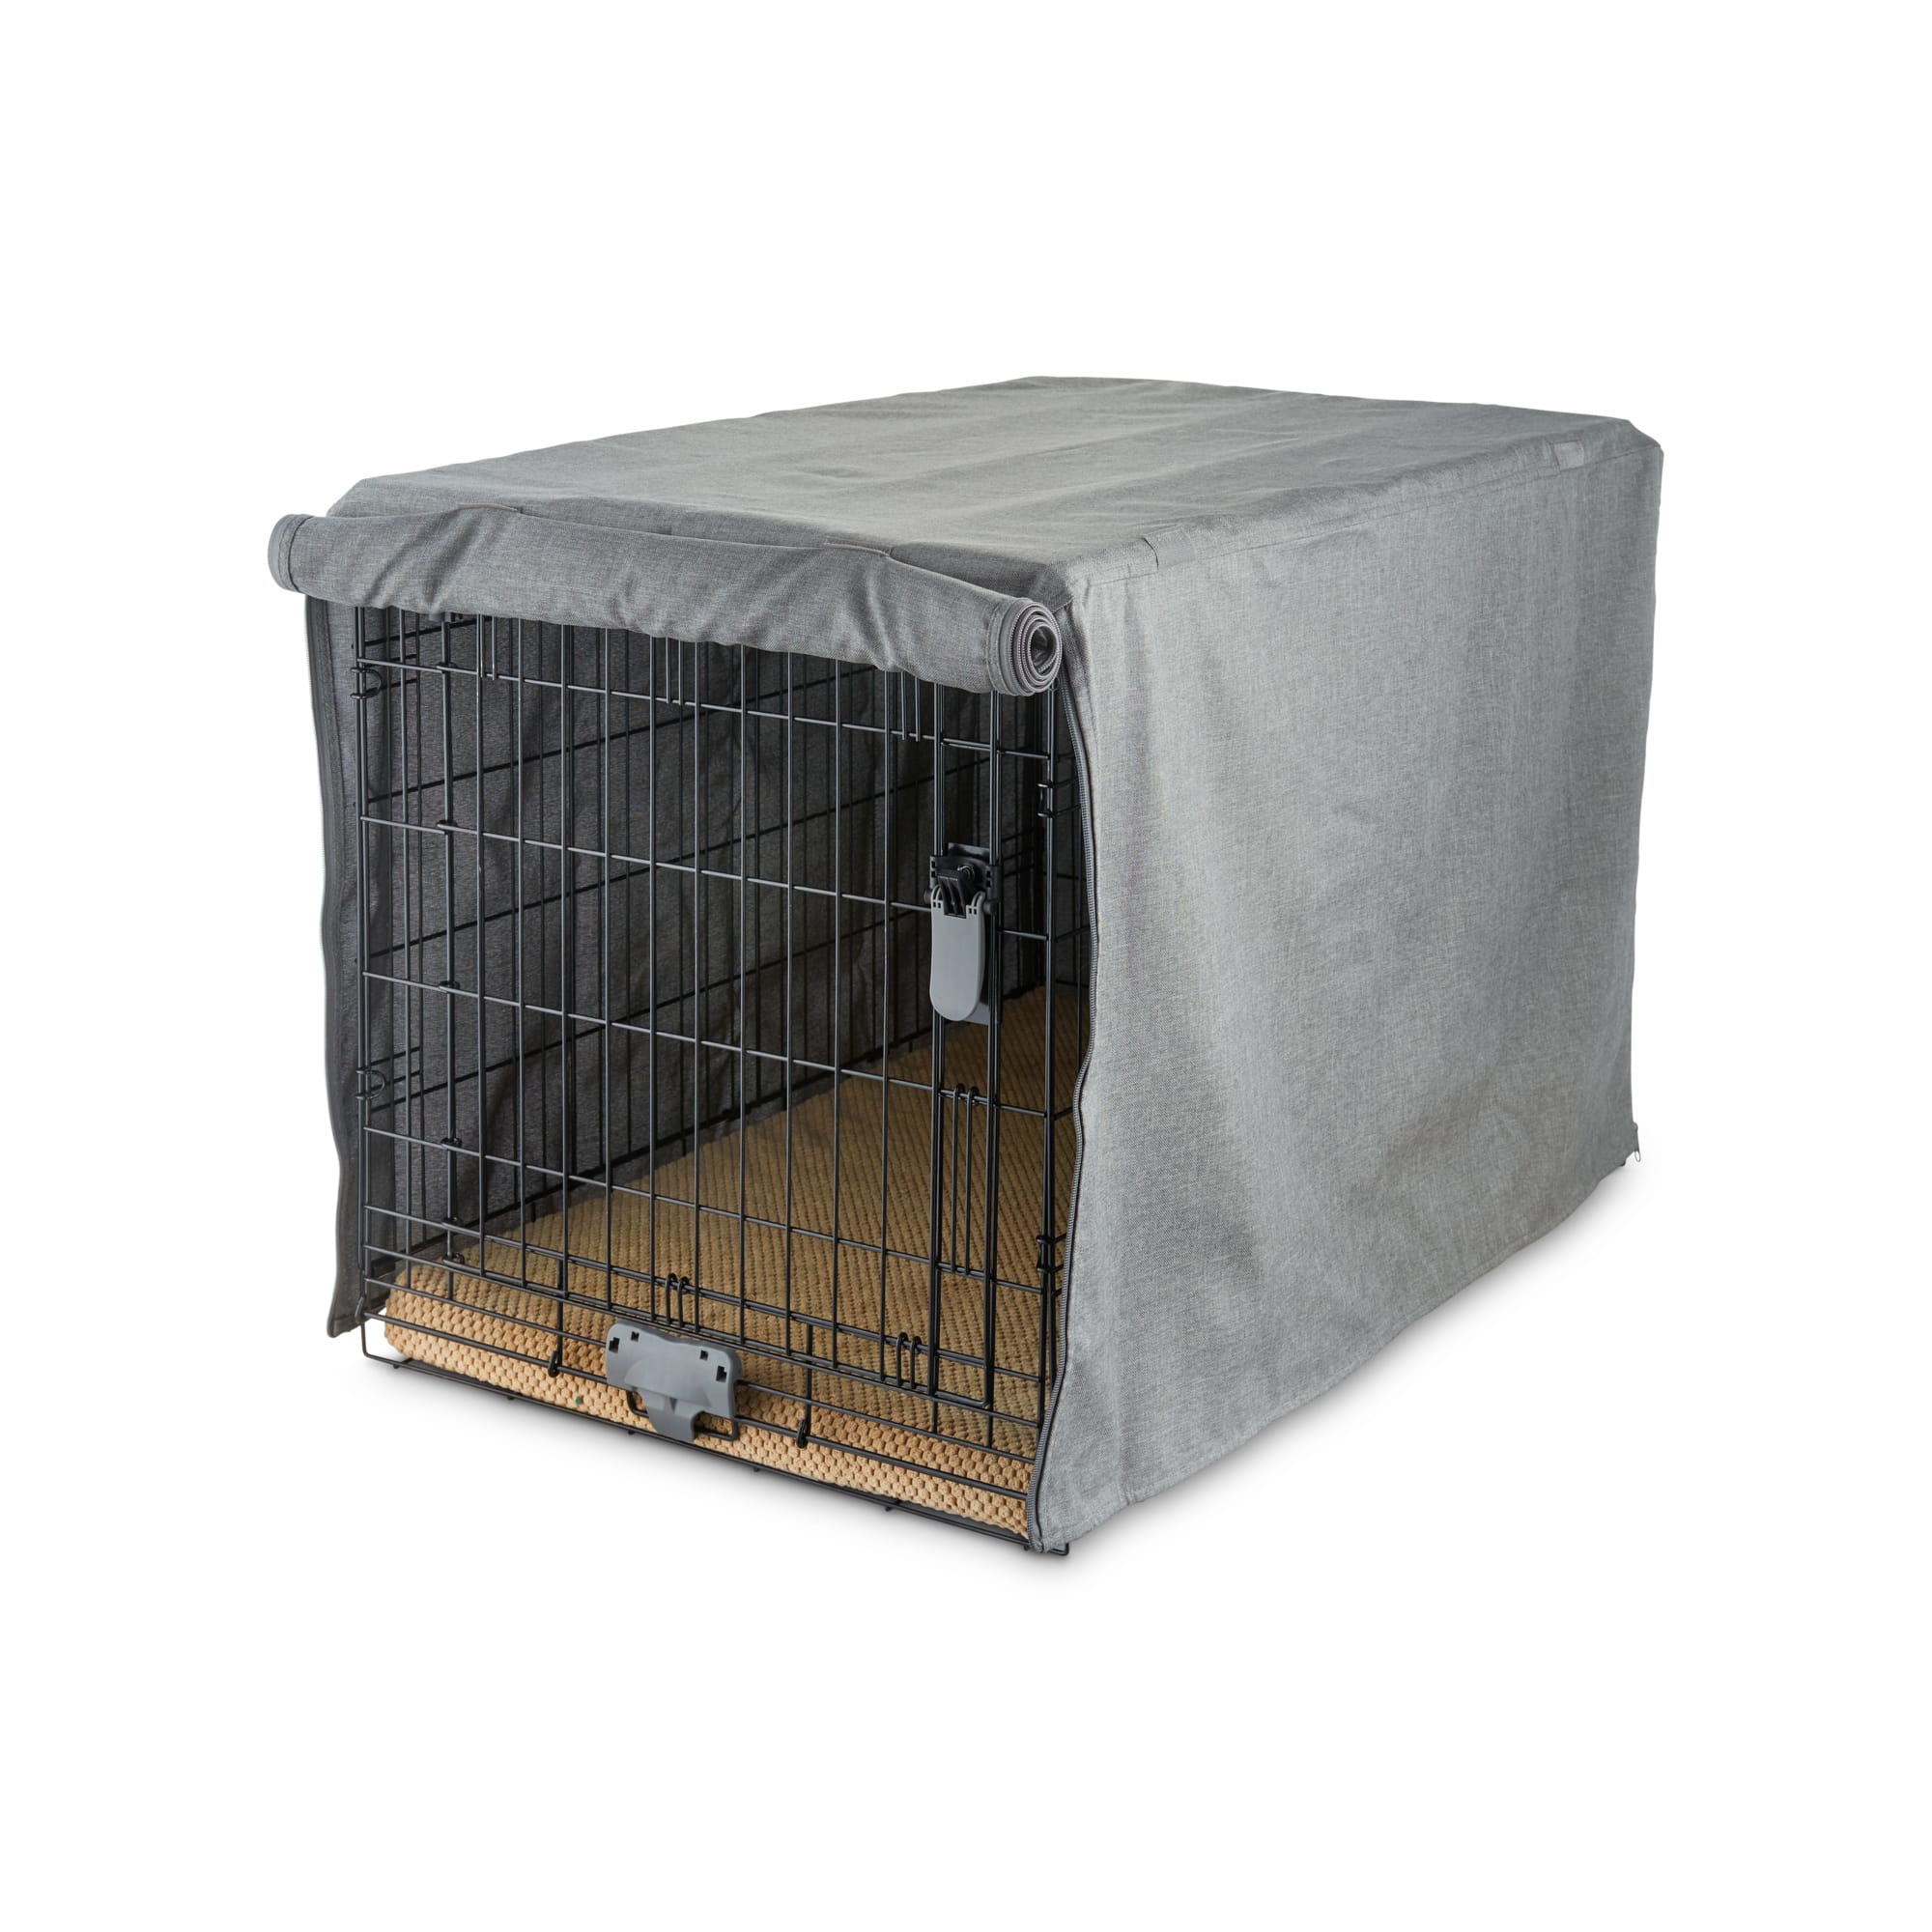 6 sizes Fits wire Security Comfort Privacy Crate Cover for Dogs 